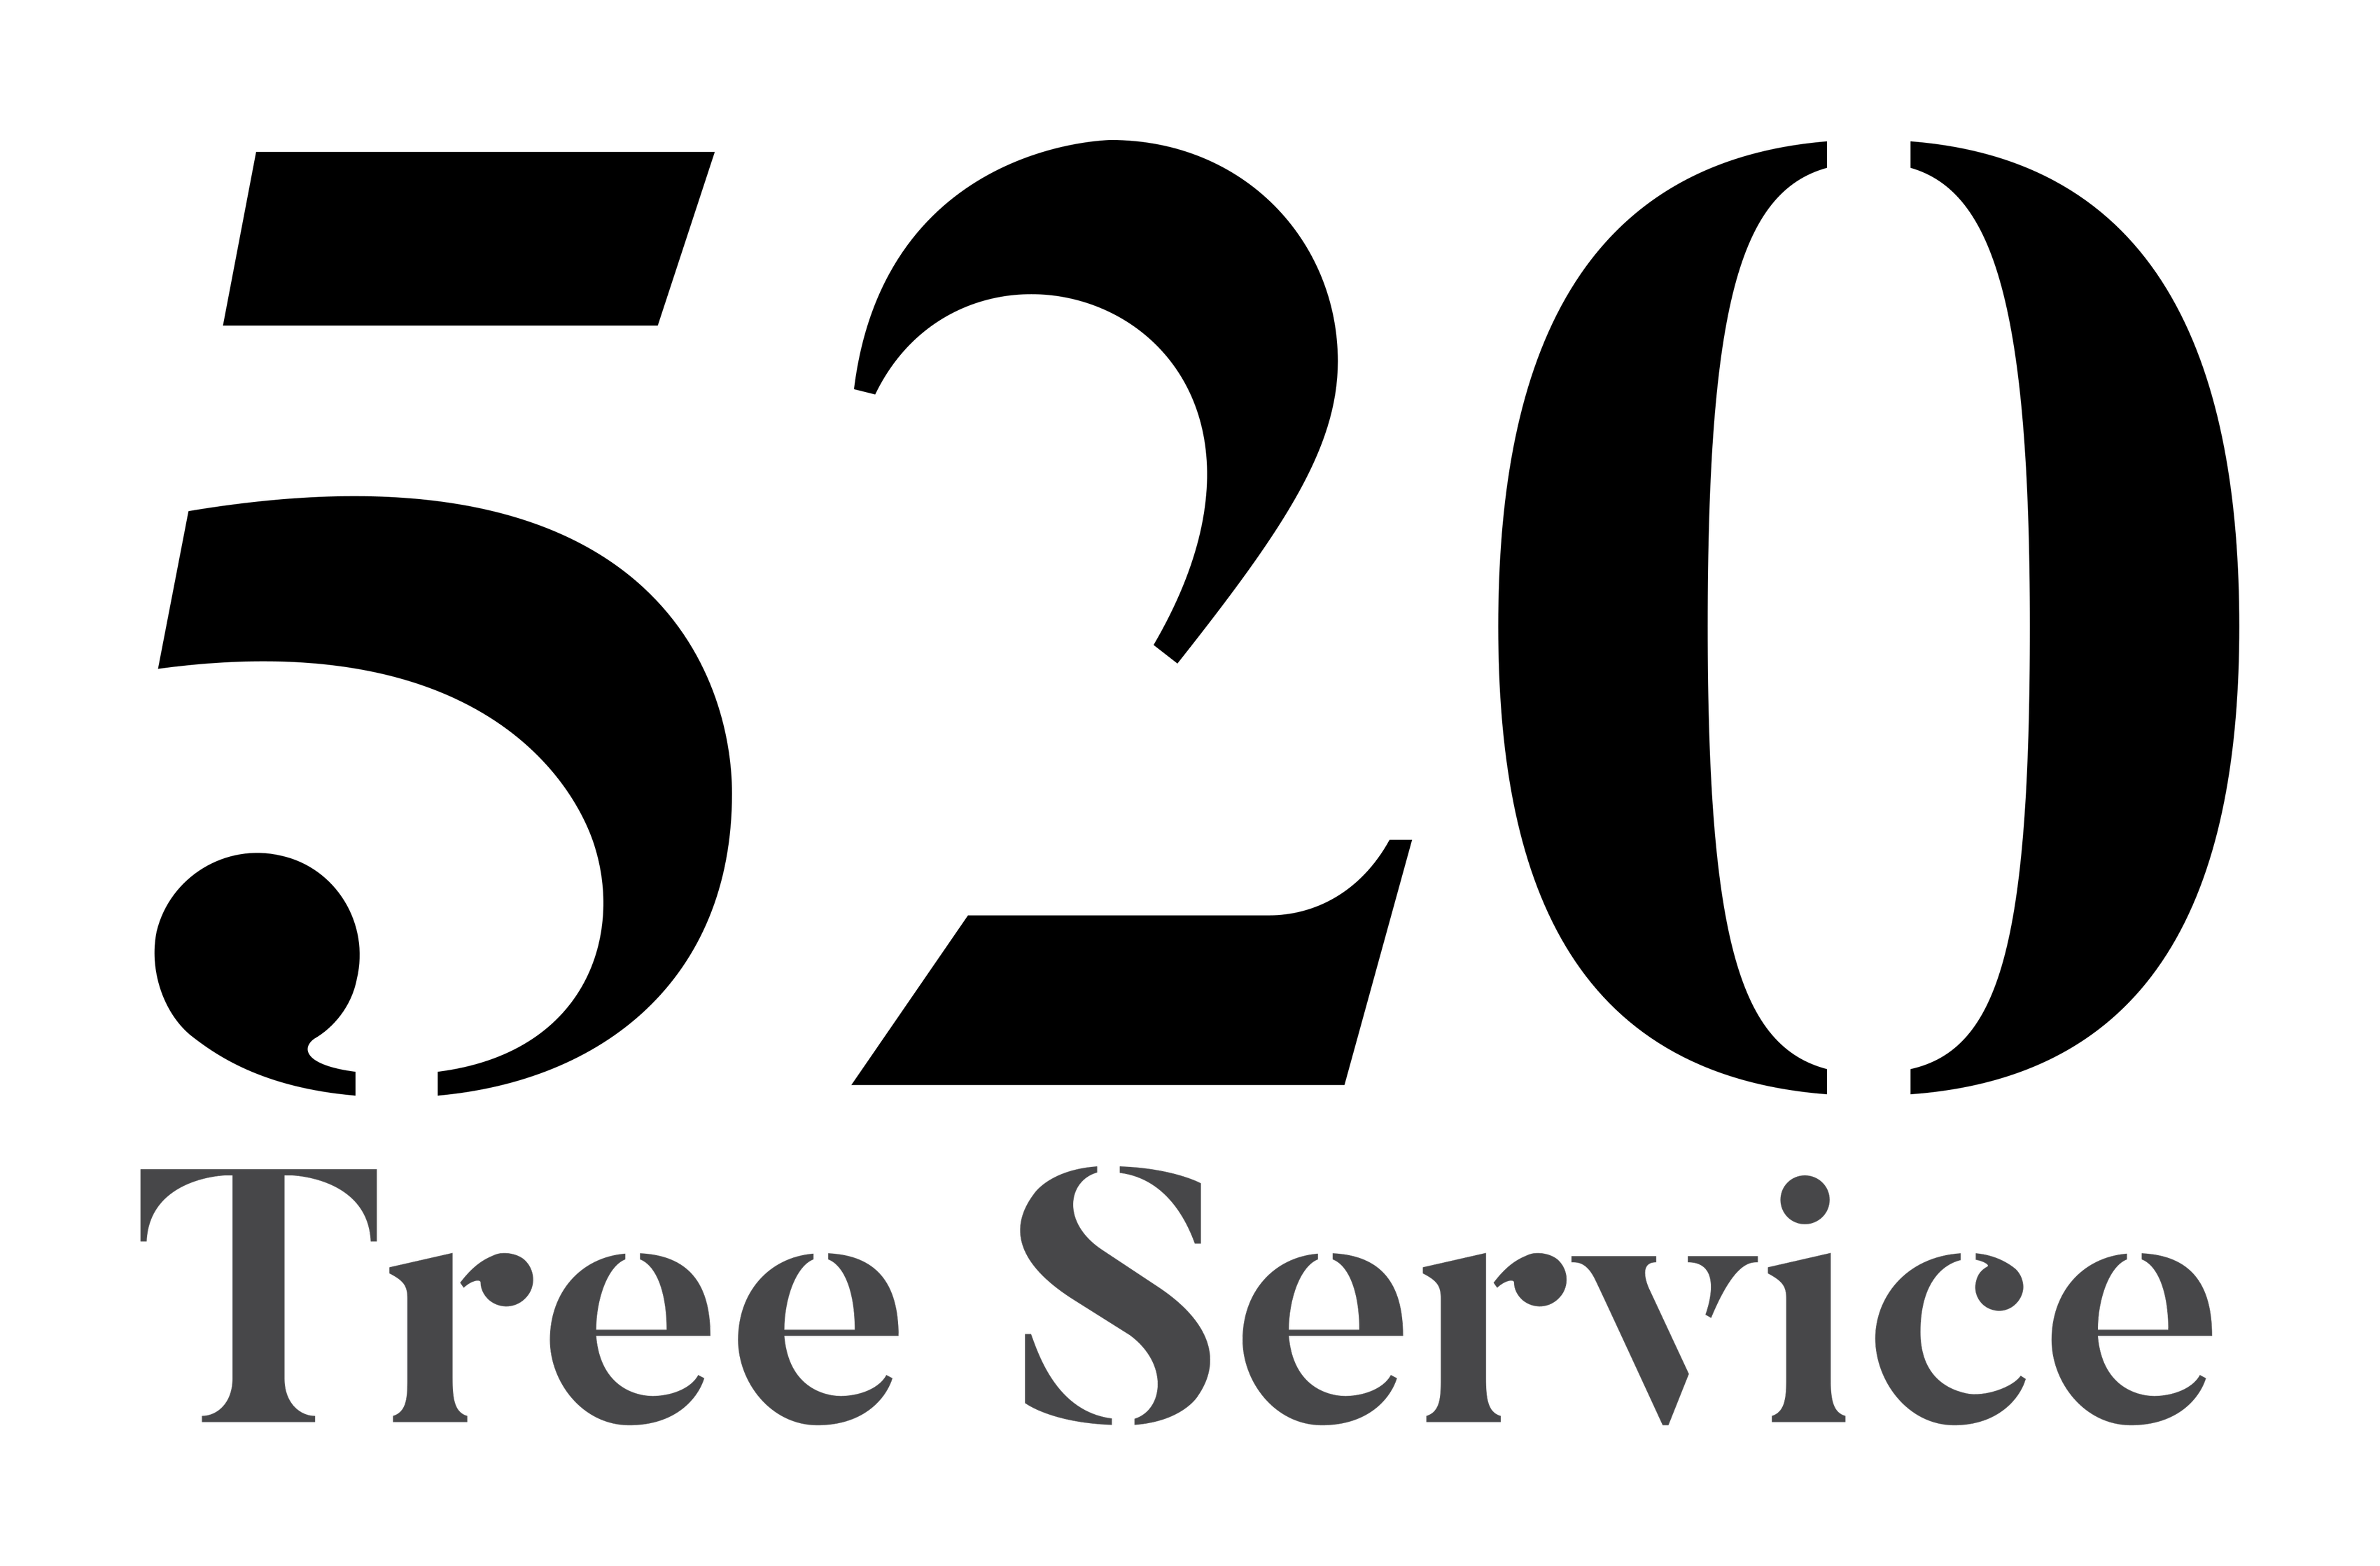 520 Tree Service - Familly Owned and Operated